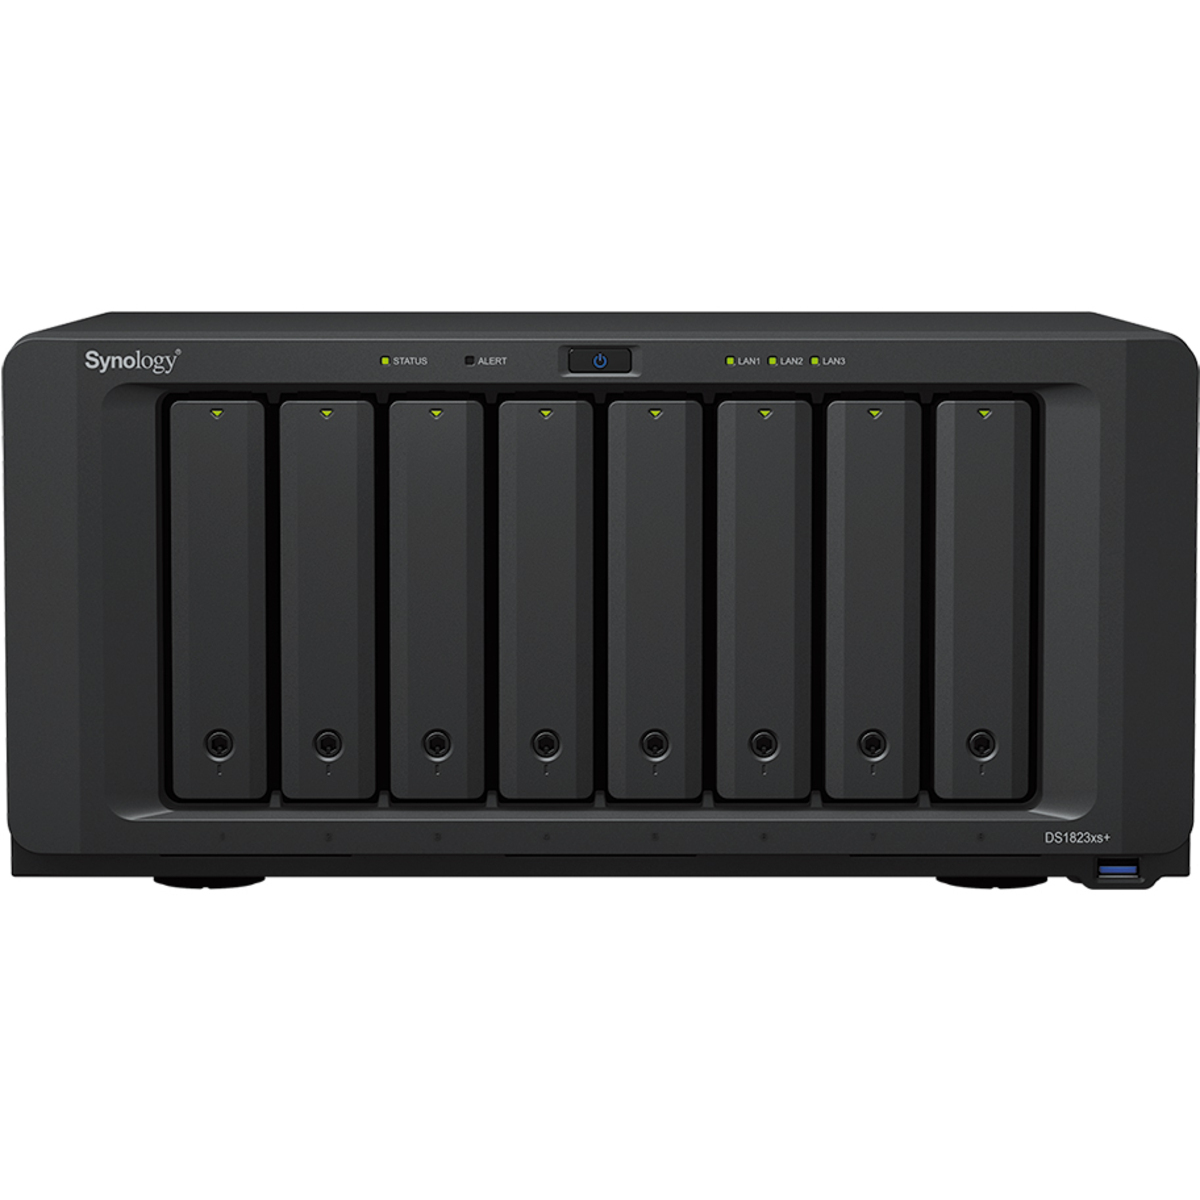 Synology DiskStation DS1823xs+ 72tb 8-Bay Desktop Multimedia / Power User / Business NAS - Network Attached Storage Device 6x12tb Synology HAT5300 Series HAT5300-12T 3.5 7200rpm SATA 6Gb/s HDD ENTERPRISE Class Drives Installed - Burn-In Tested DiskStation DS1823xs+